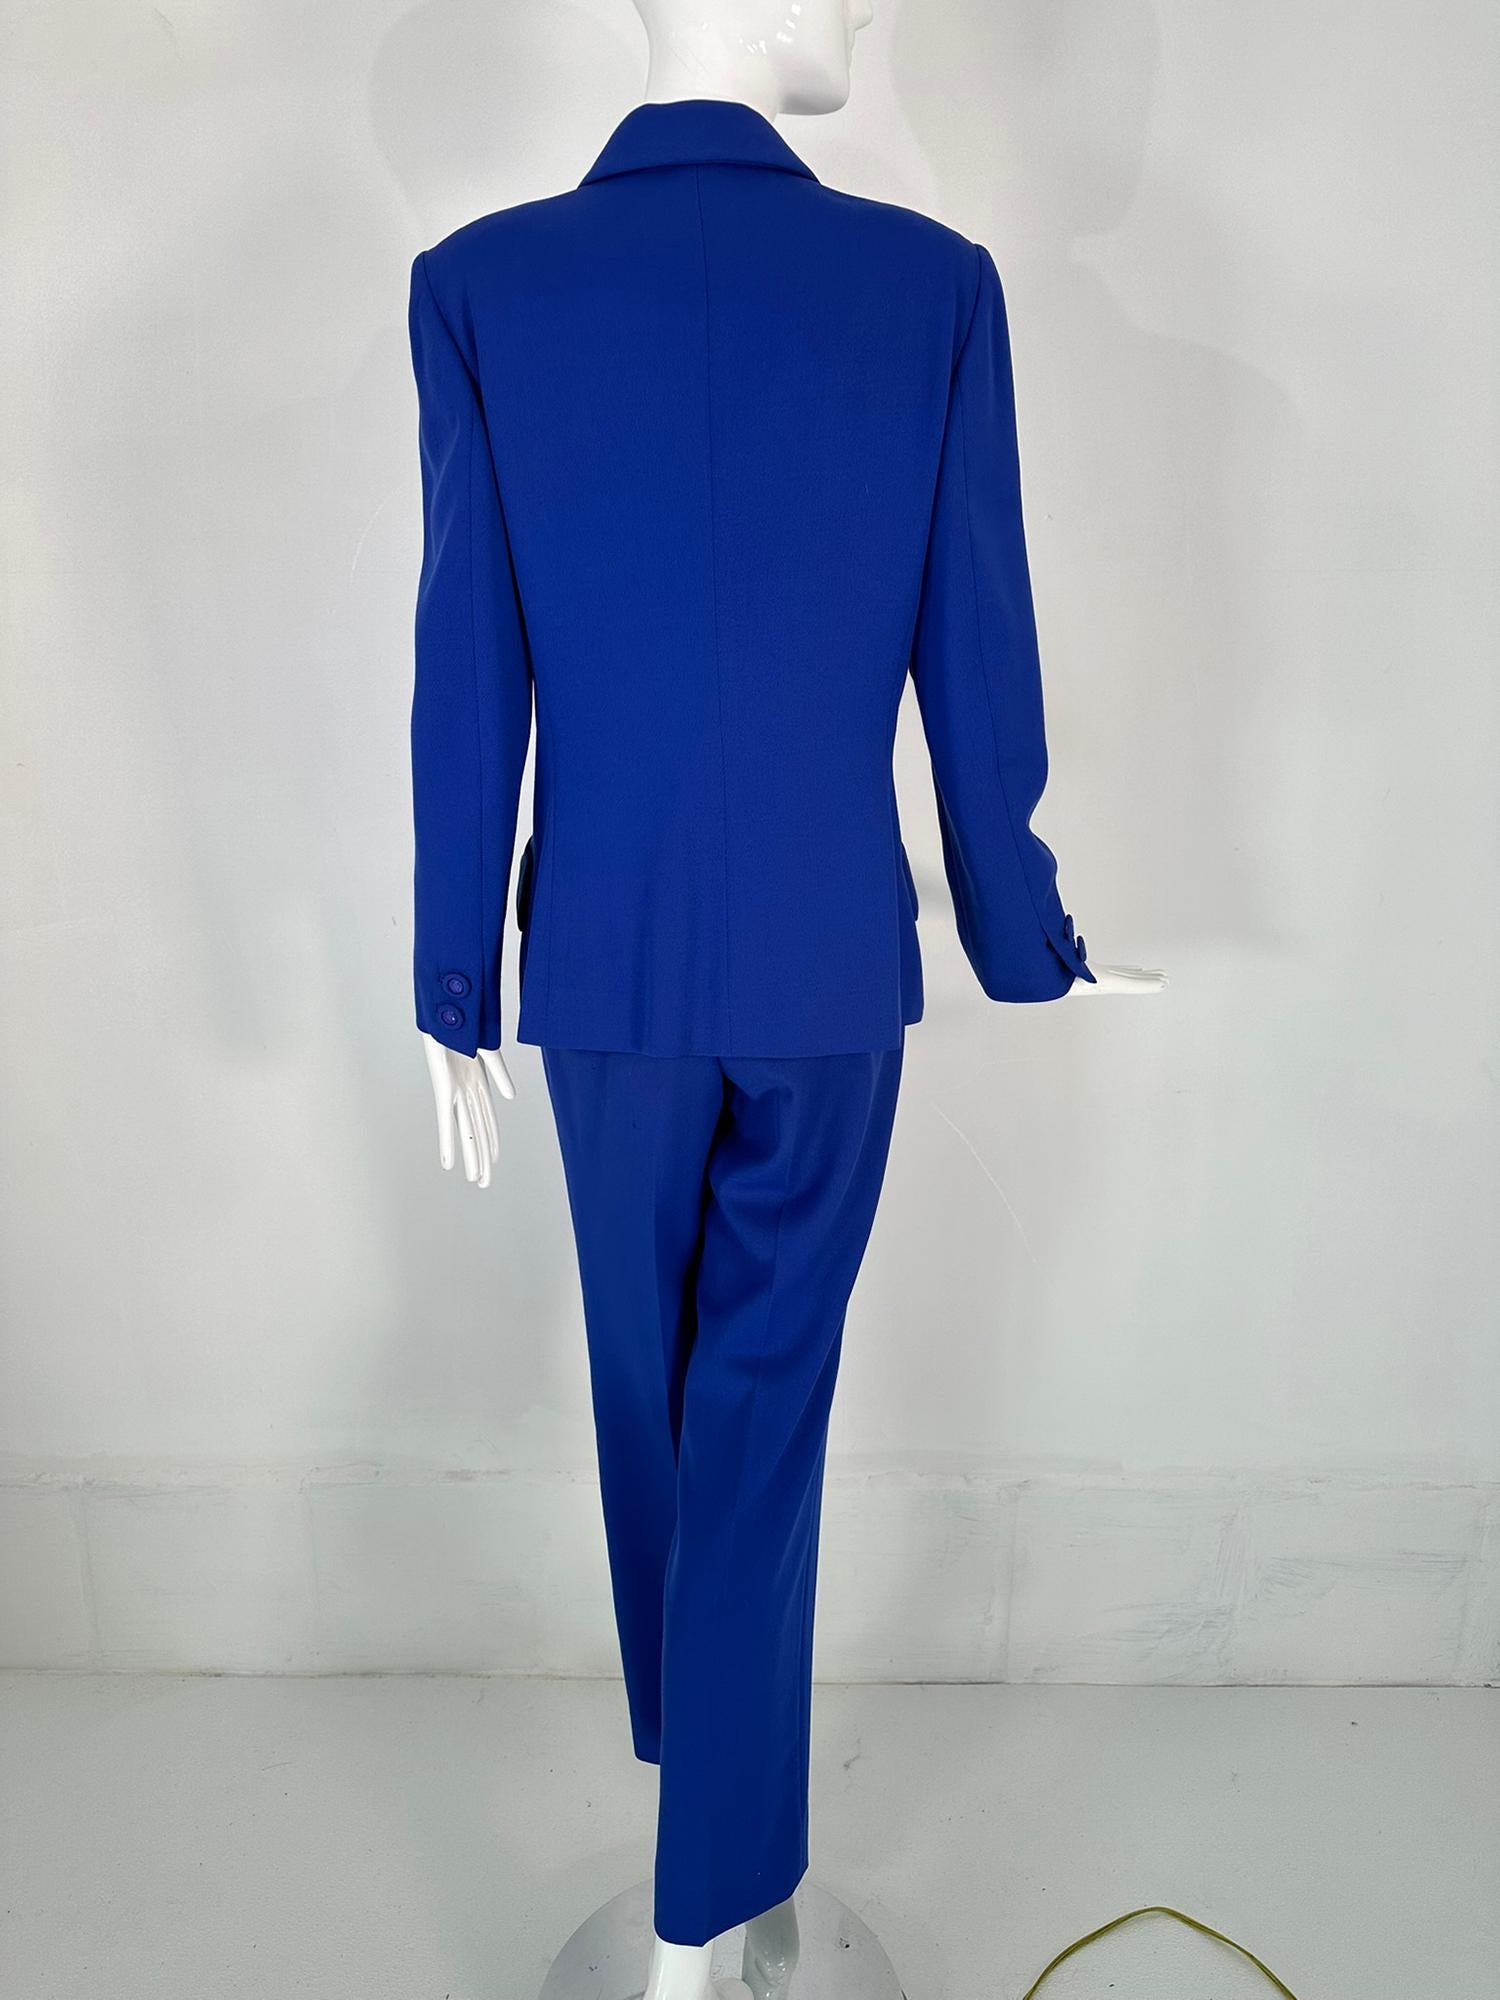 Gianni Versace Couture F/W 1995 Royal Blue Wool Pant Suit  For Sale 3